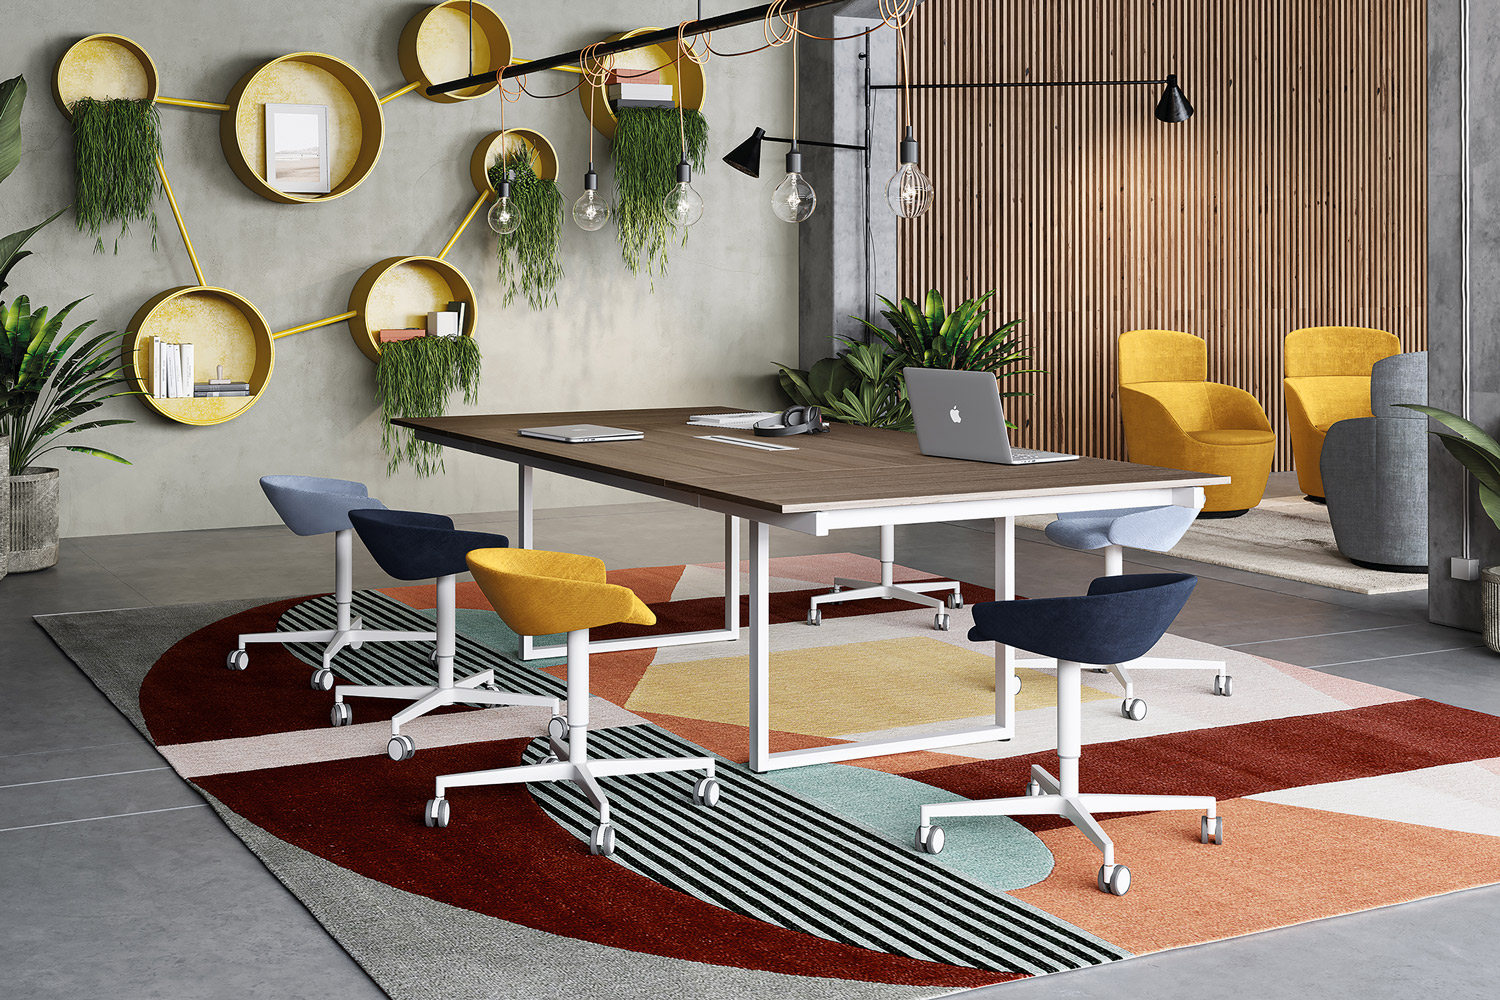 5 ideas for collaborative office workspaces